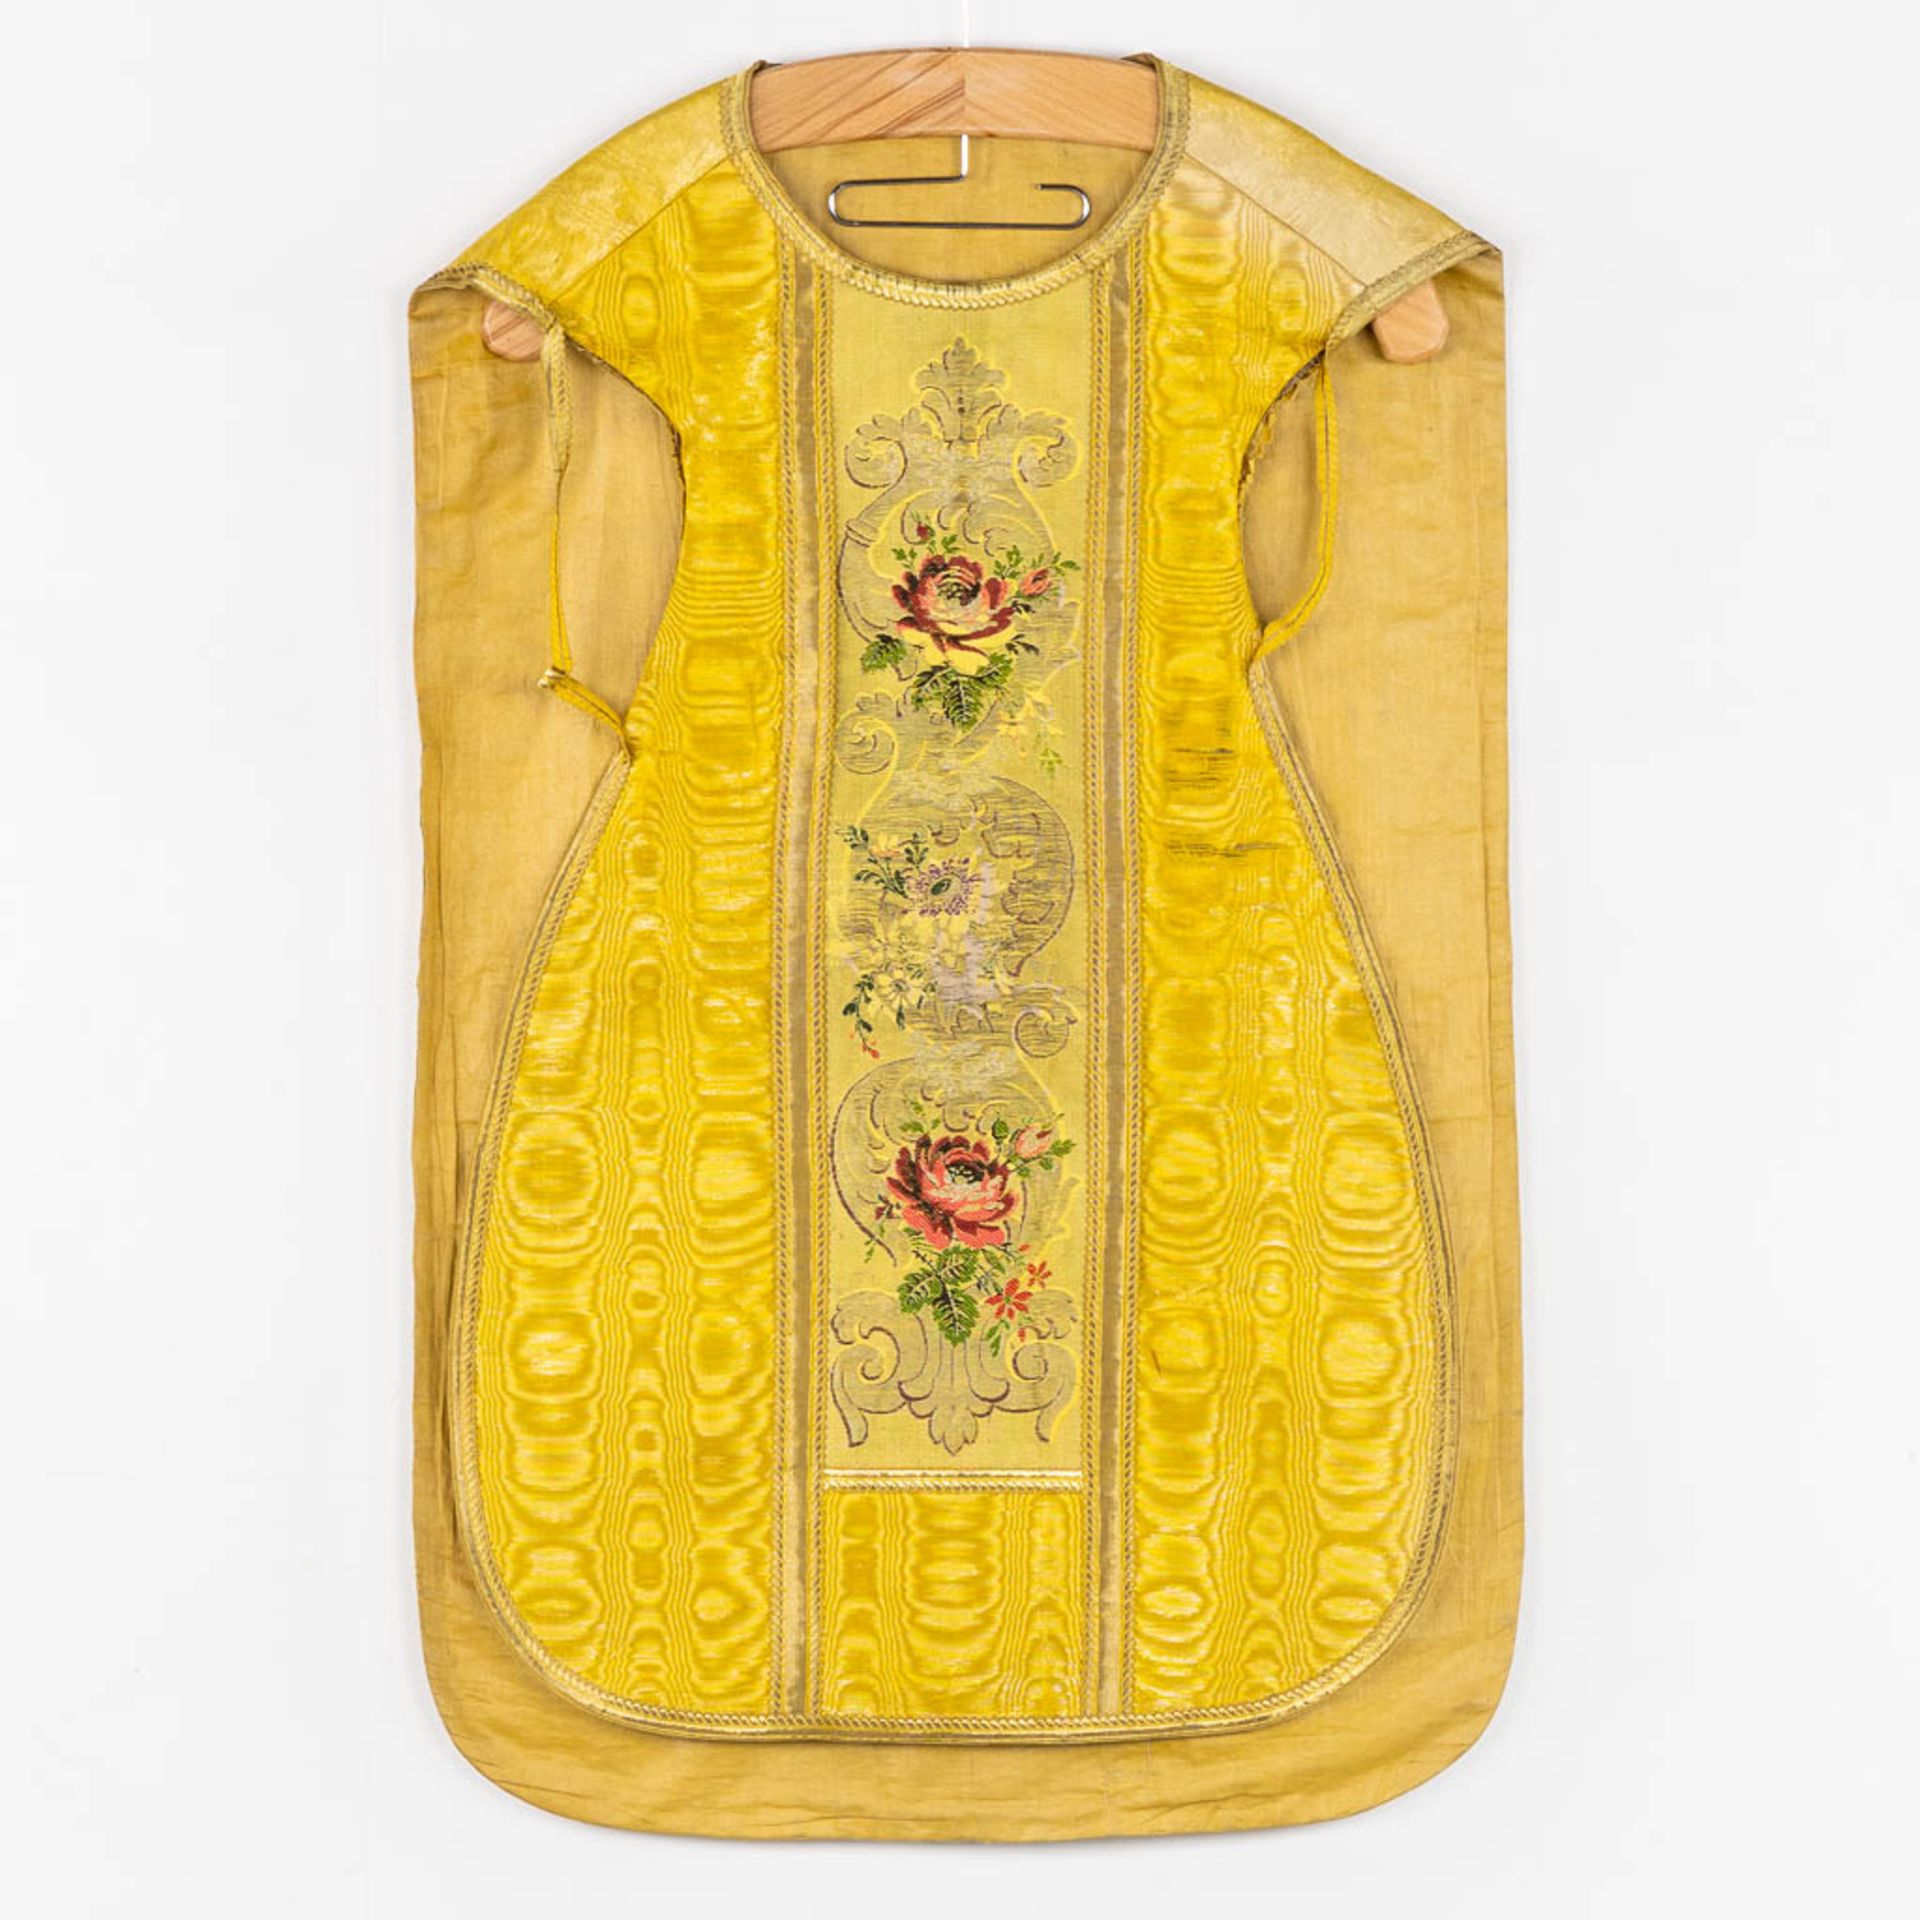 A Humeral Veil and Four Roman Chasubles, embroideries with an IHS and floral decor. - Image 14 of 29